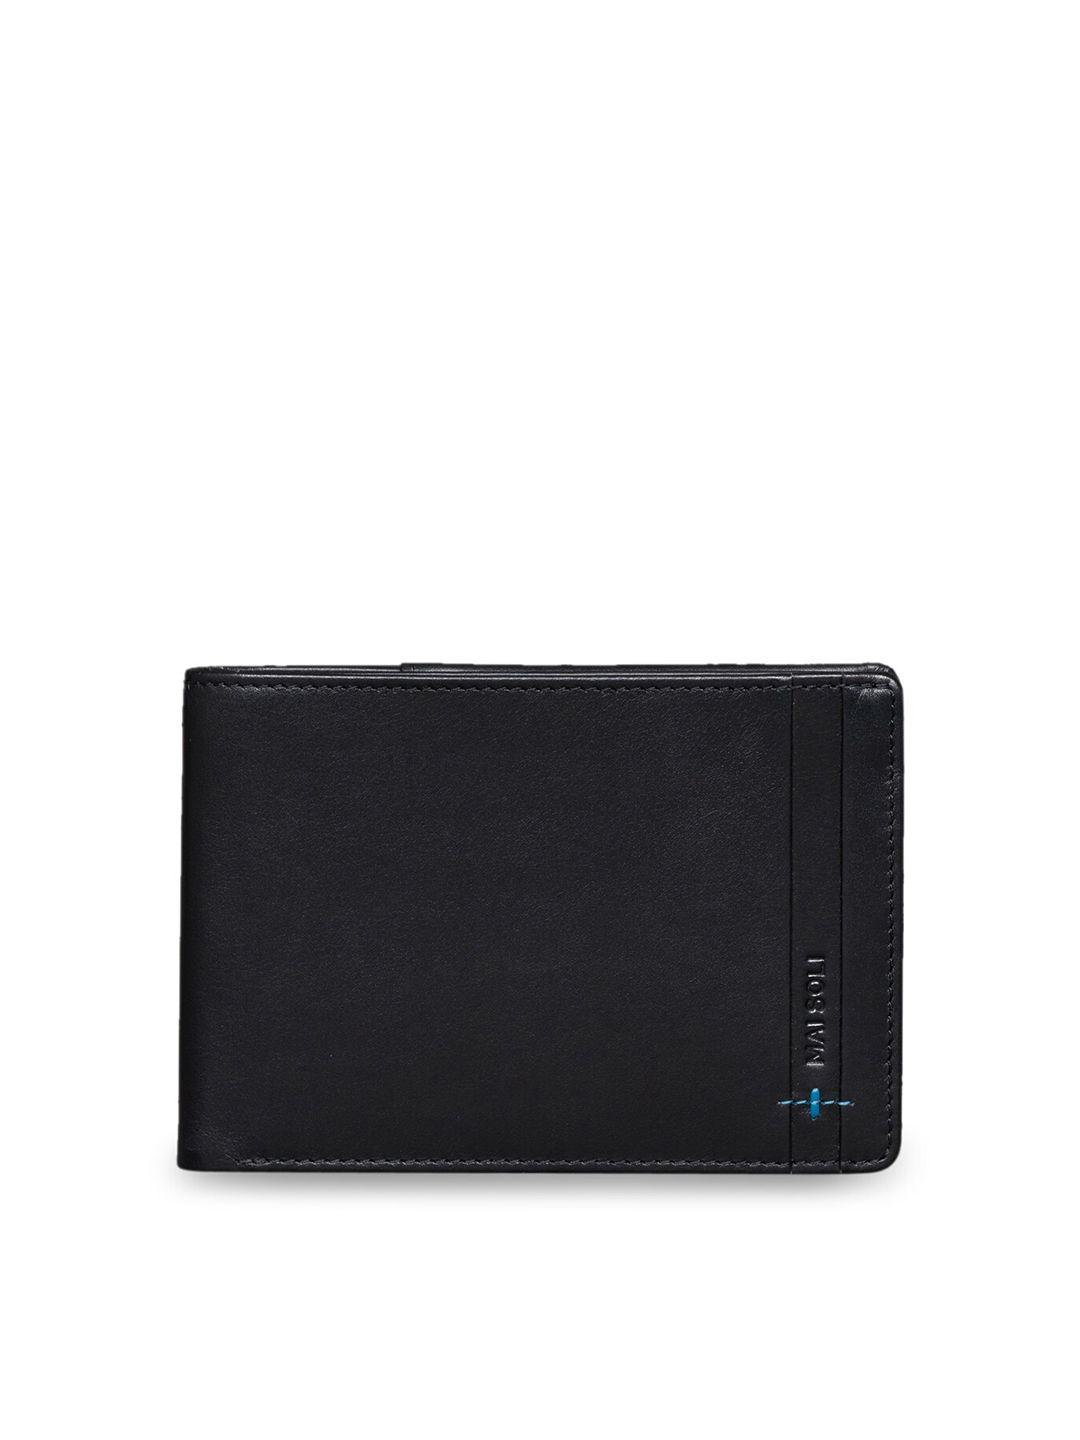 mai soli genuine leather wallet with passport holder